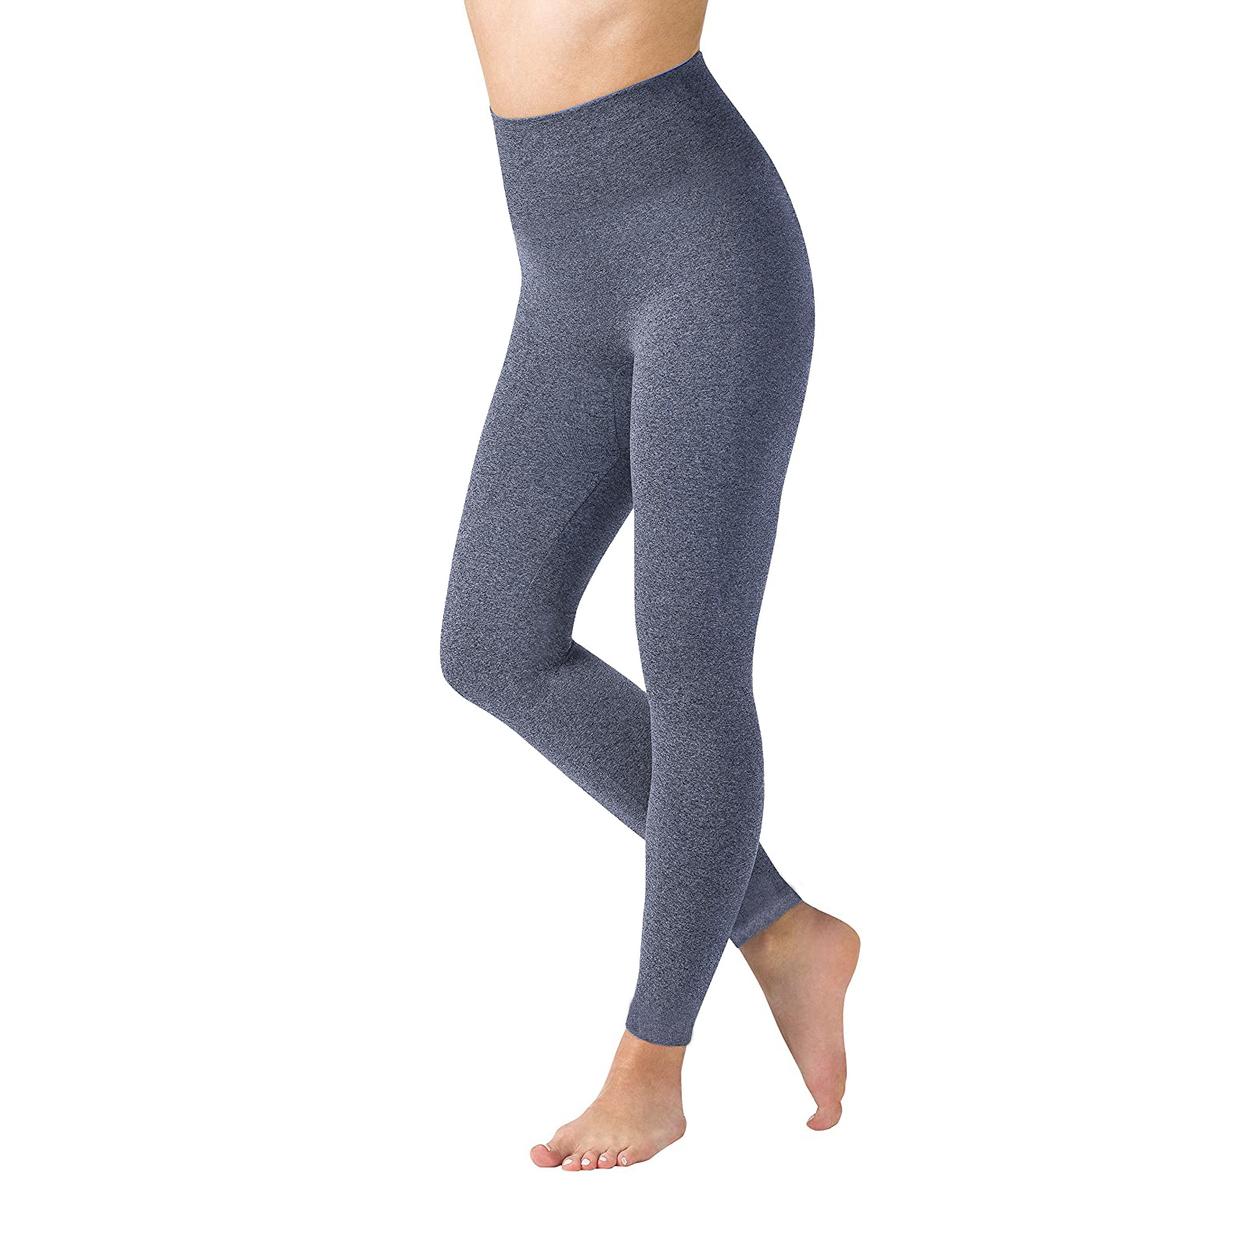 Women's High Waisted Ultra-Soft Fleece Lined Warm Marled Leggings(Available In Plus Sizes) - Charcoal, Large